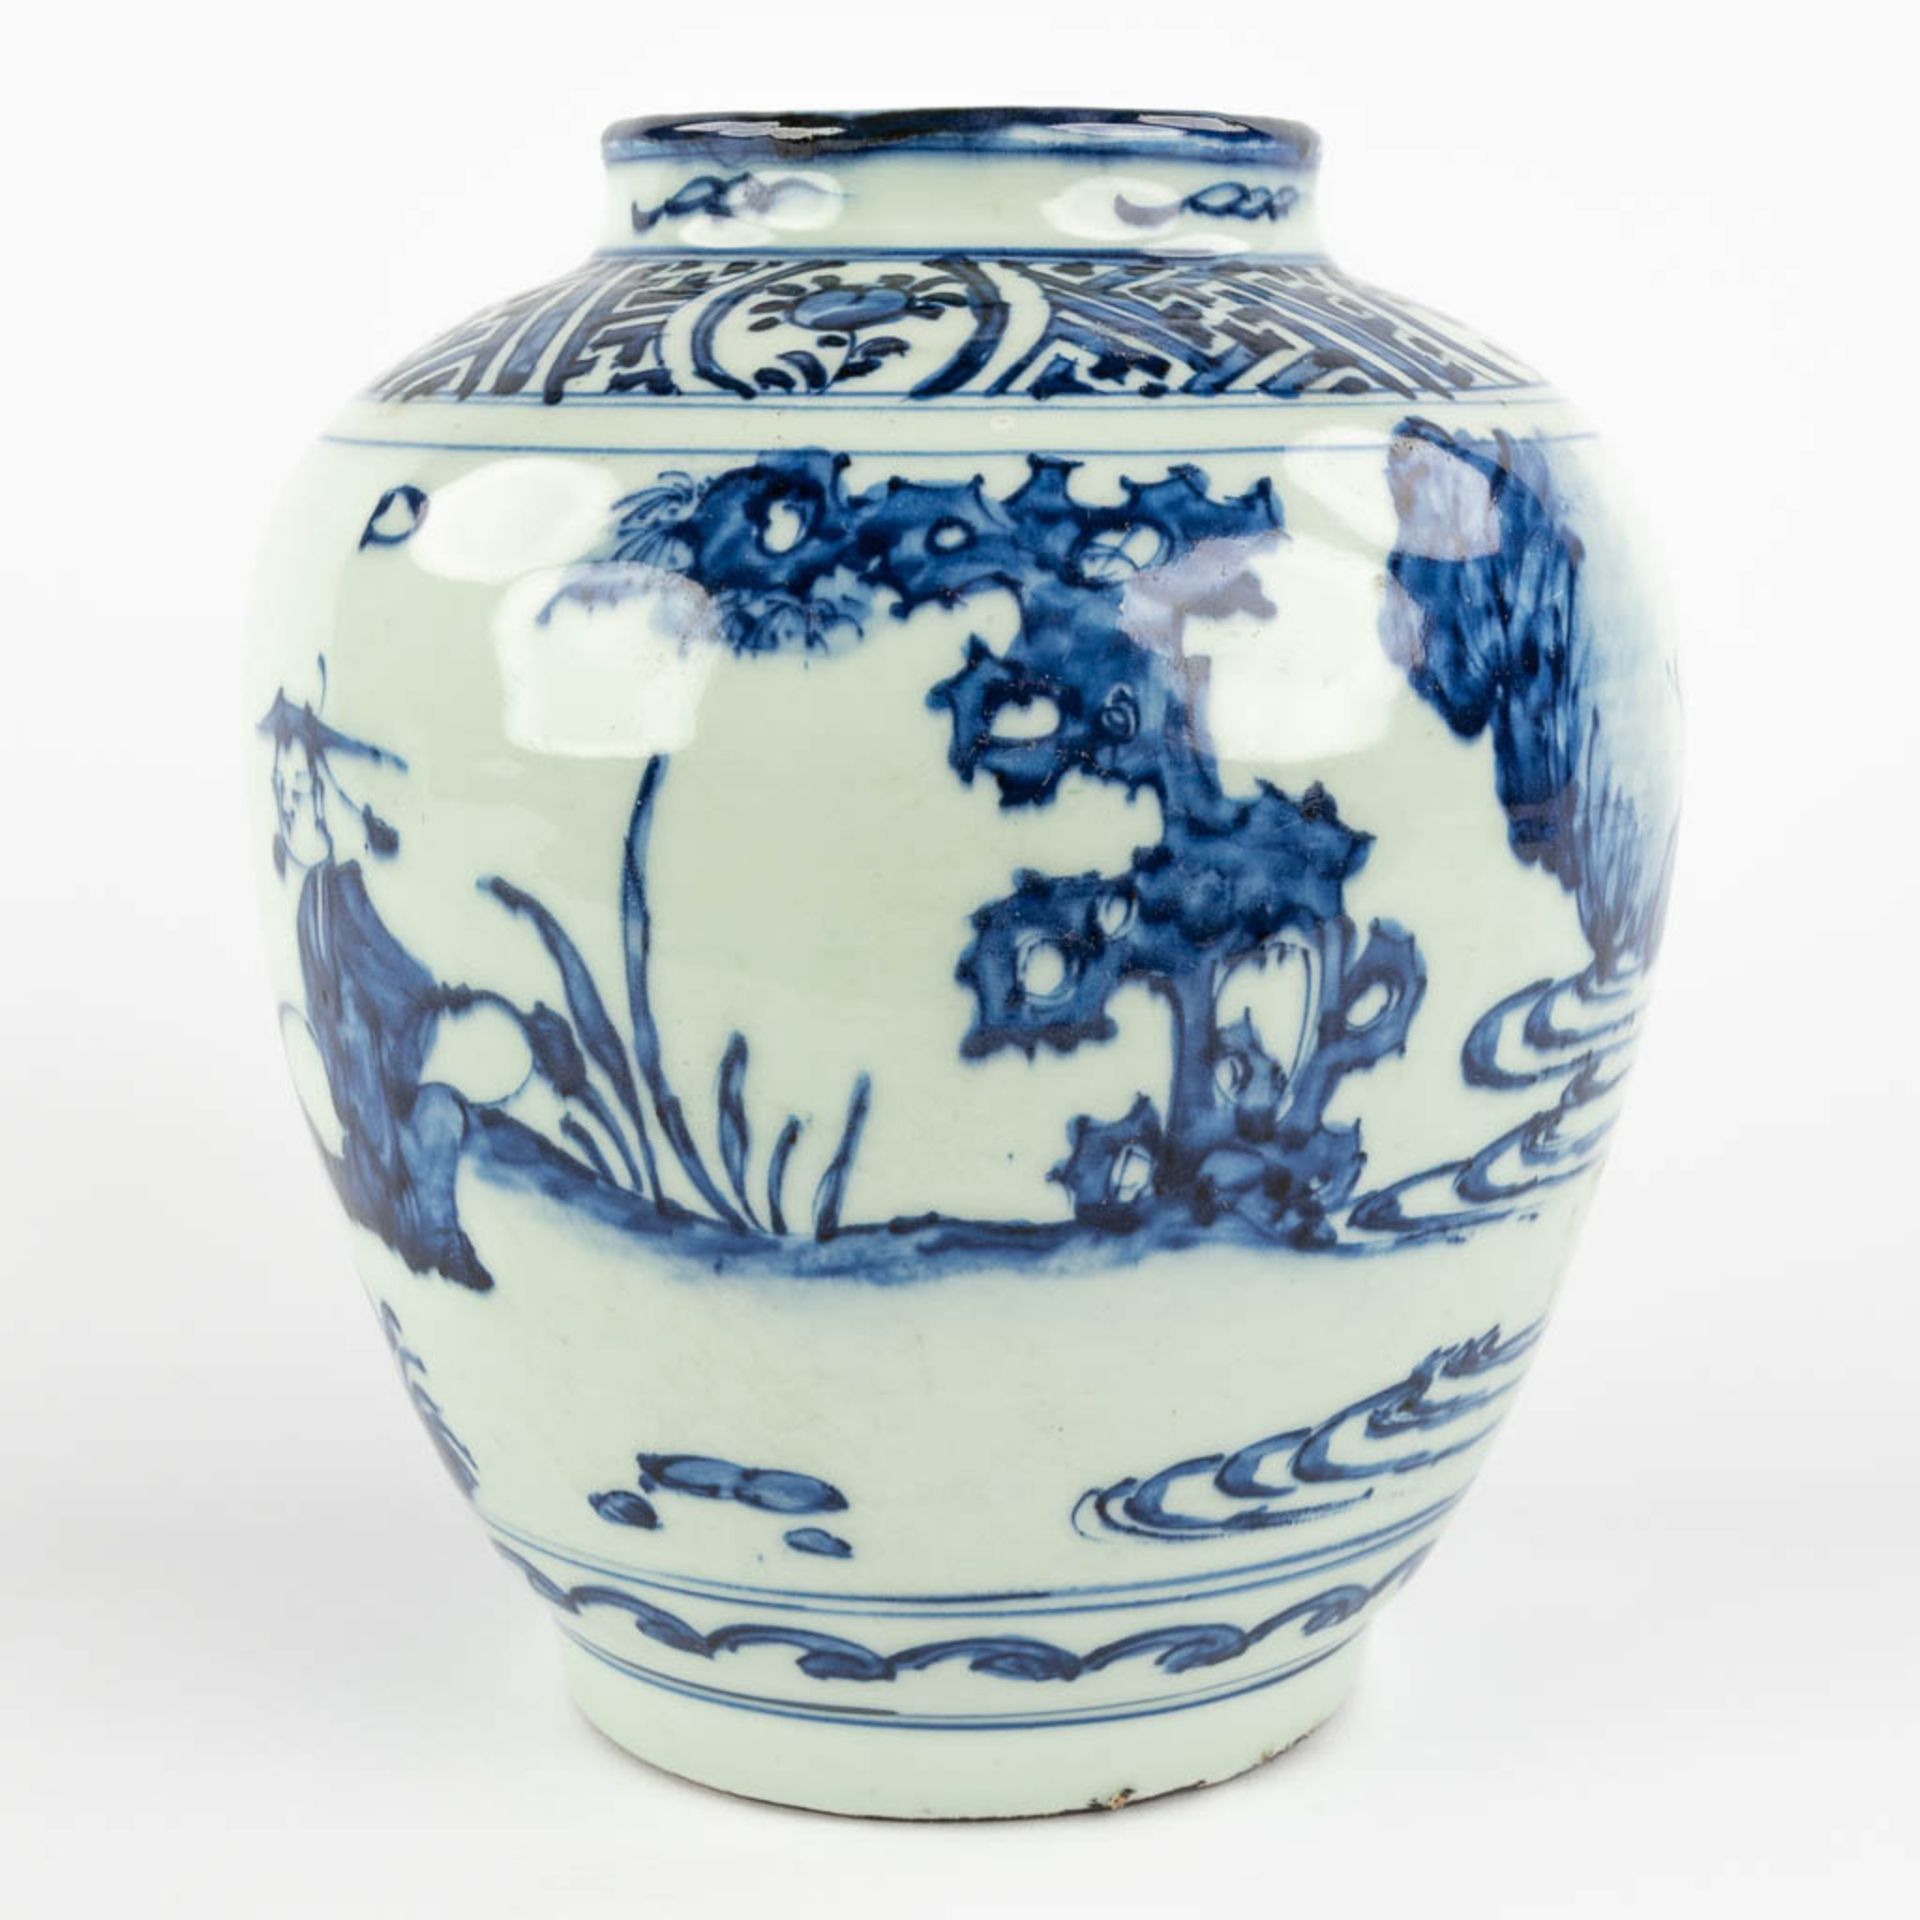 A Chinese pot with blue-white decor of a landscape with figurine. Possibly 17th C. (H:23 x D:20 cm) - Bild 7 aus 11